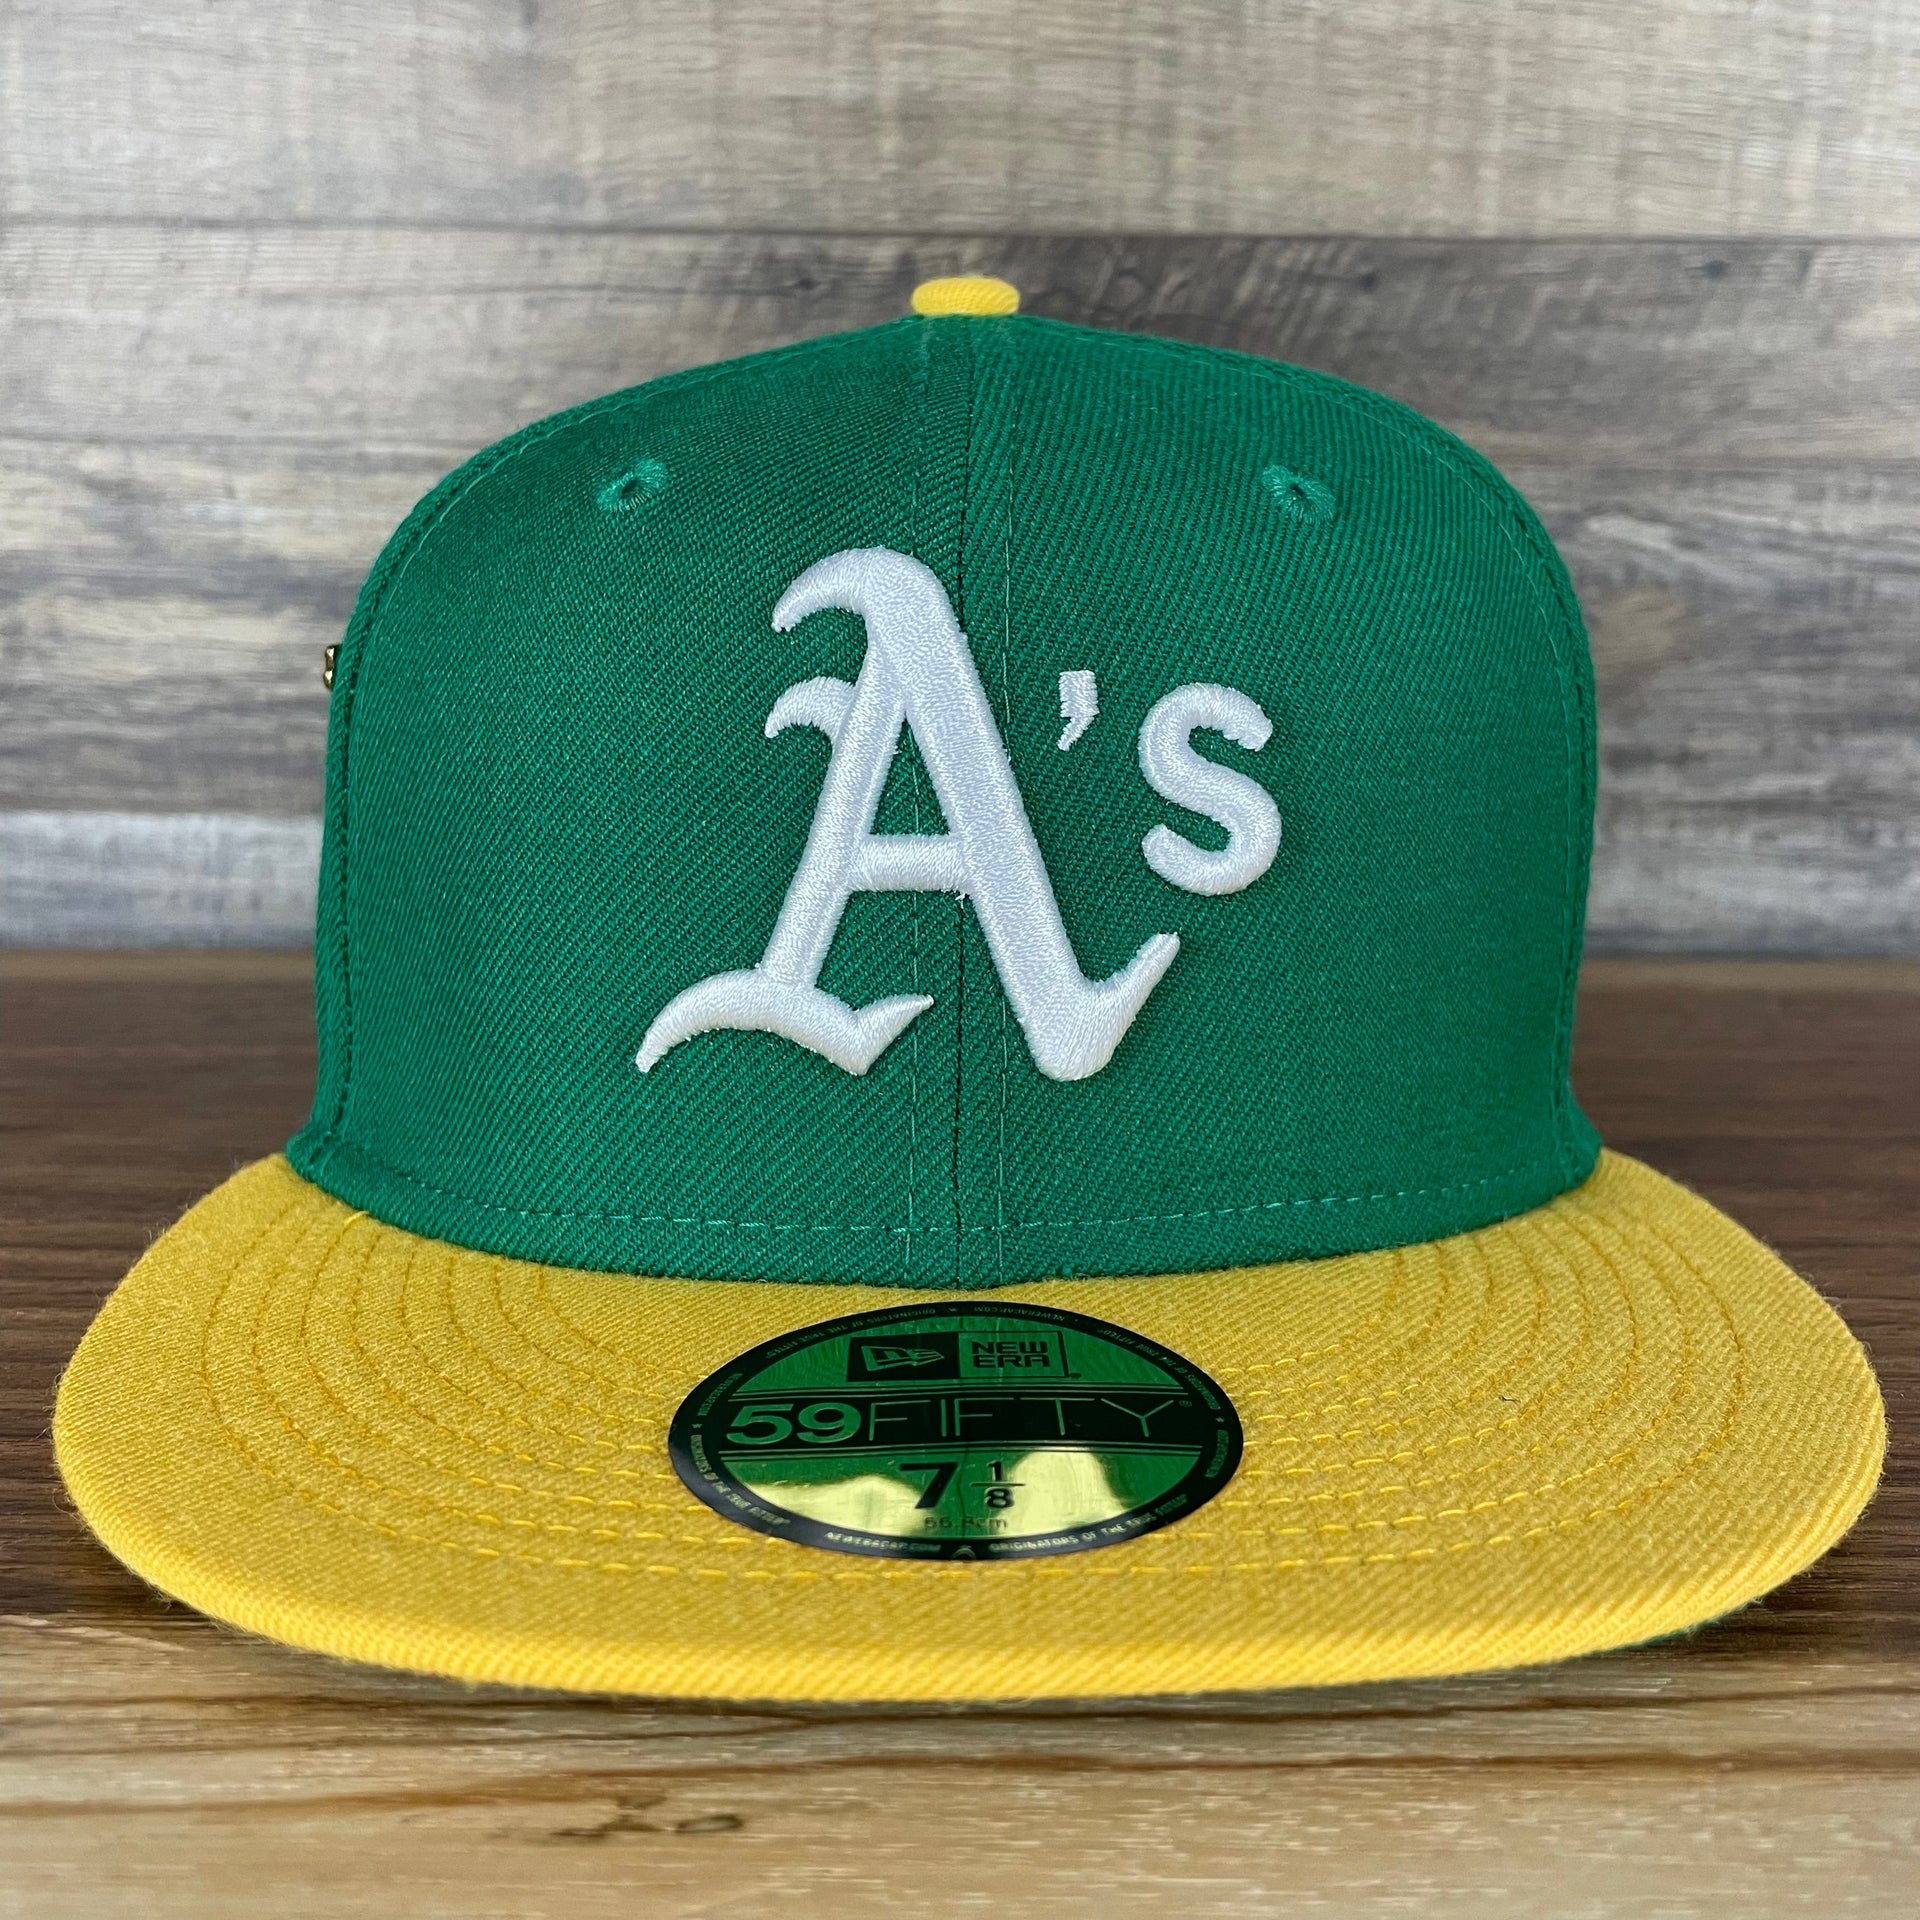 The front of the Oakland Athletics Cooperstown 5950 Day Side Patch Green Bottom 59Fifty Fitted Cap